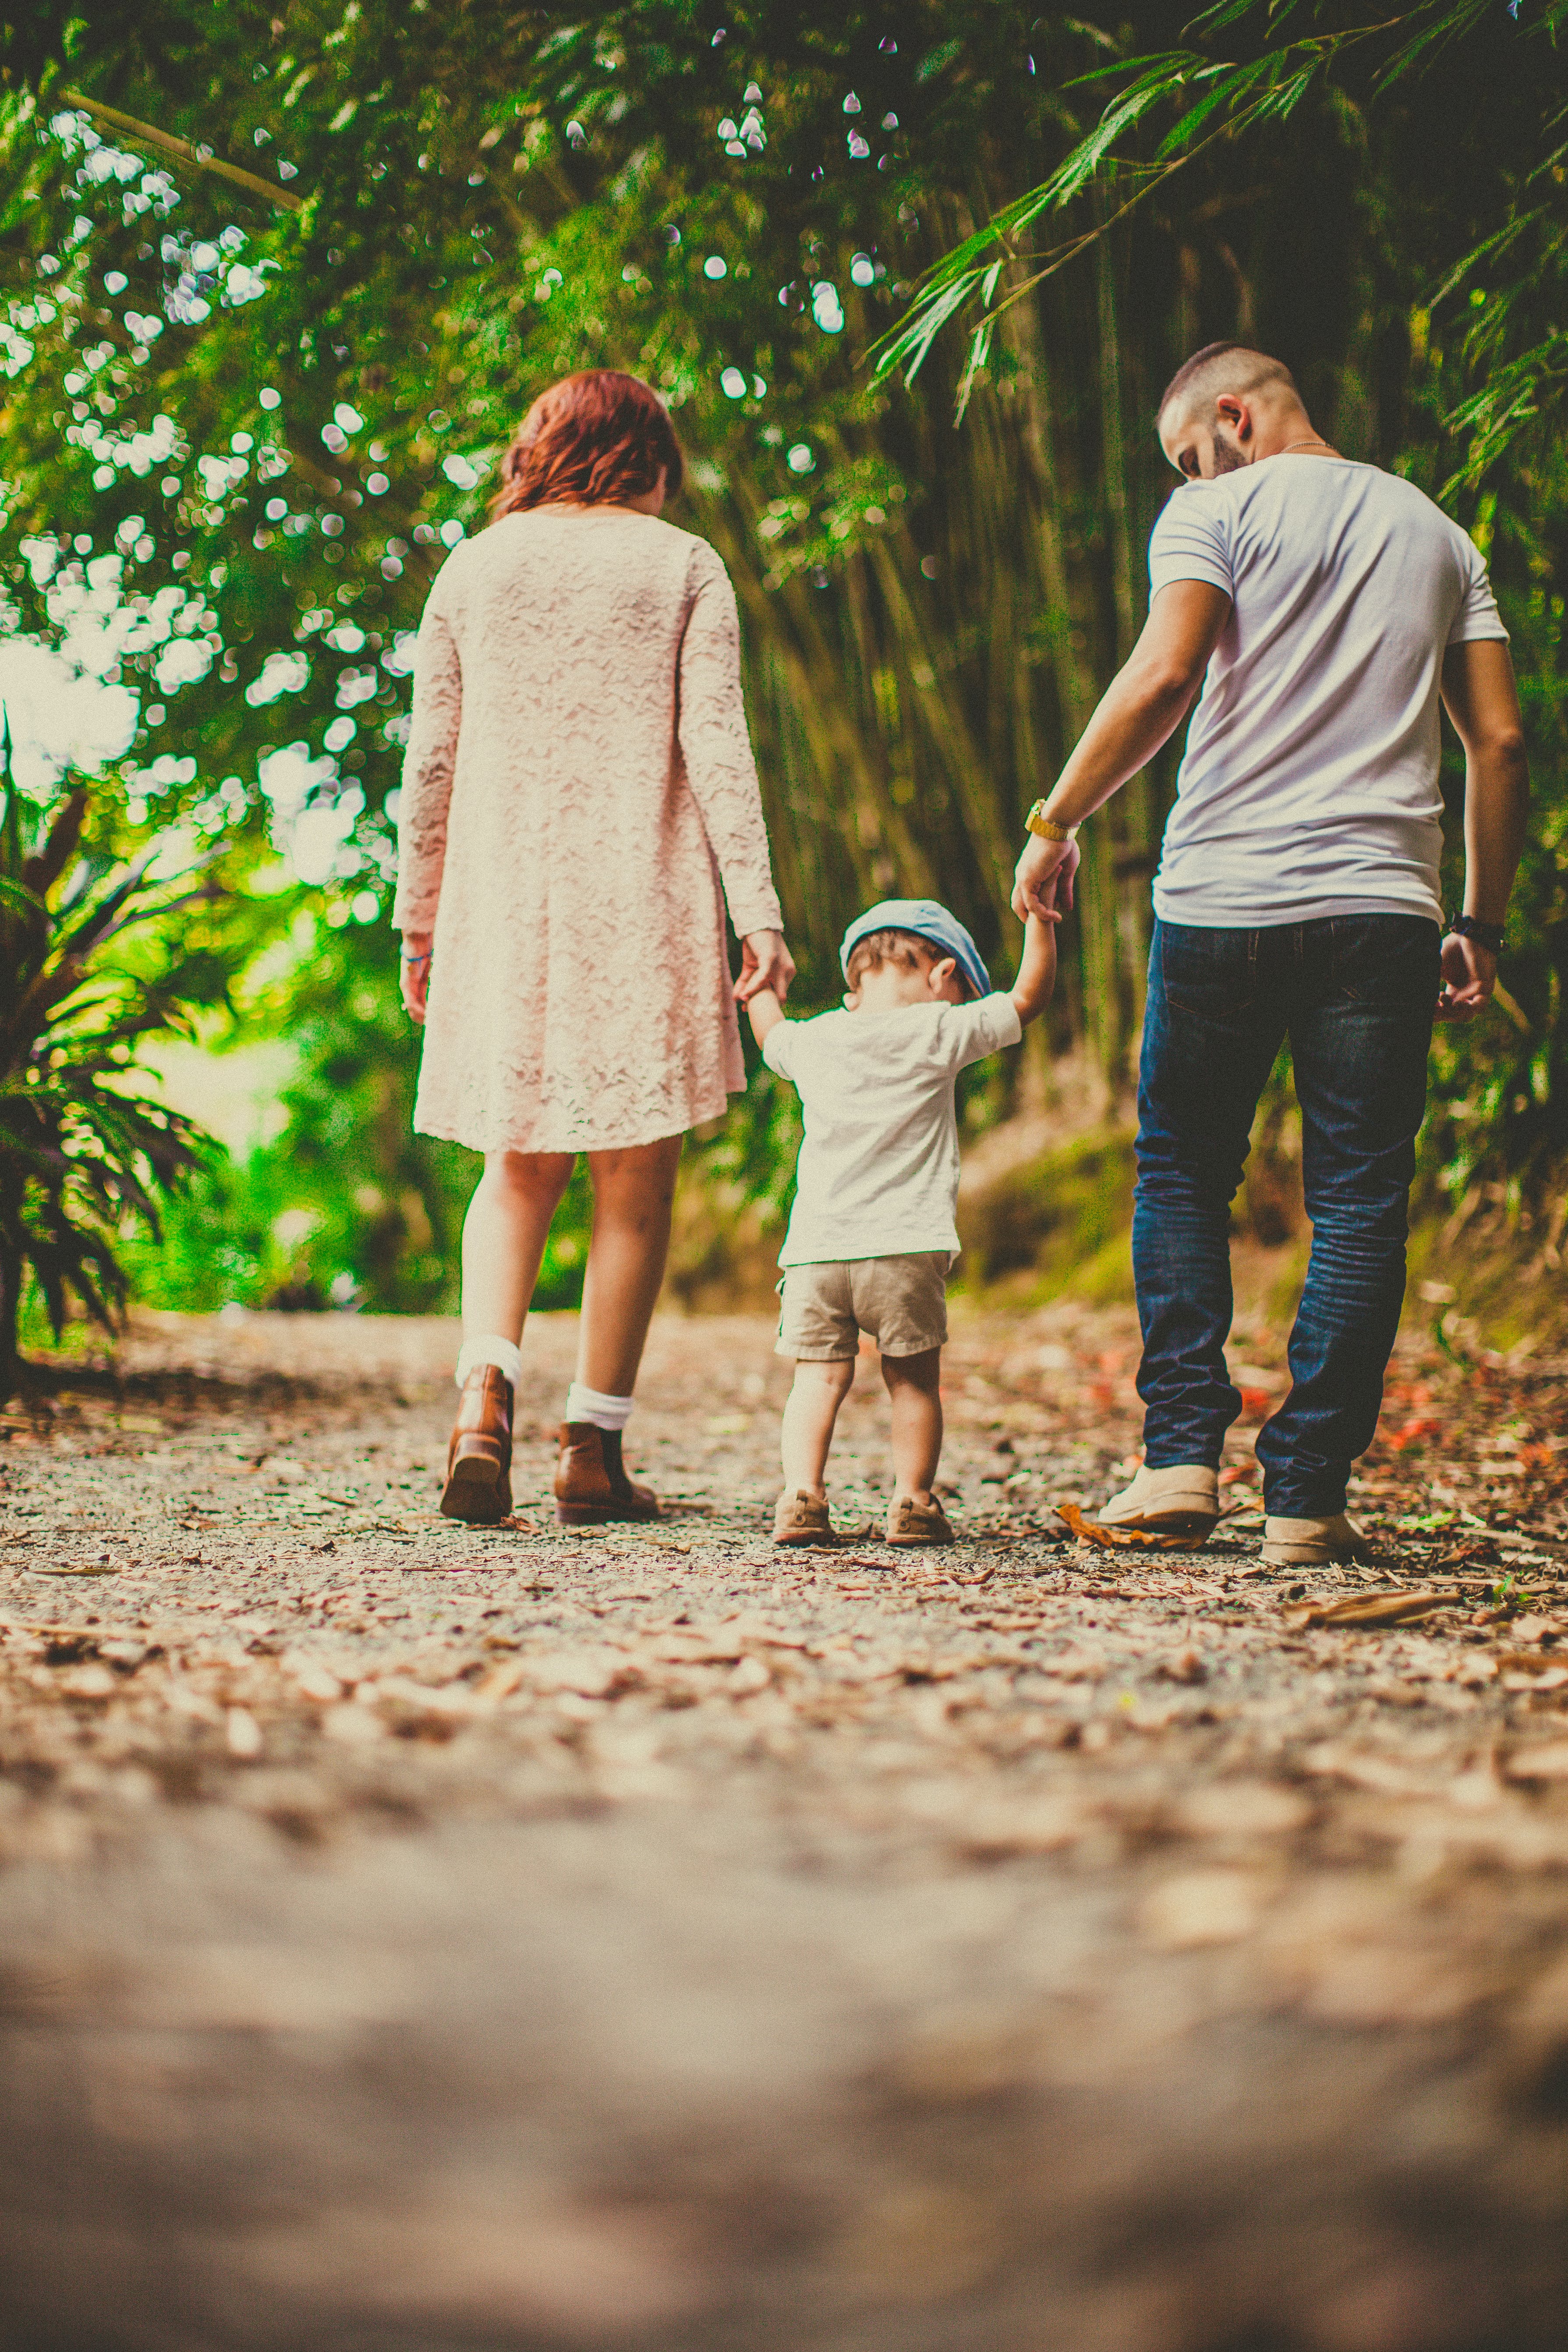 A couple taking a walk with their son. | Source: Pexels